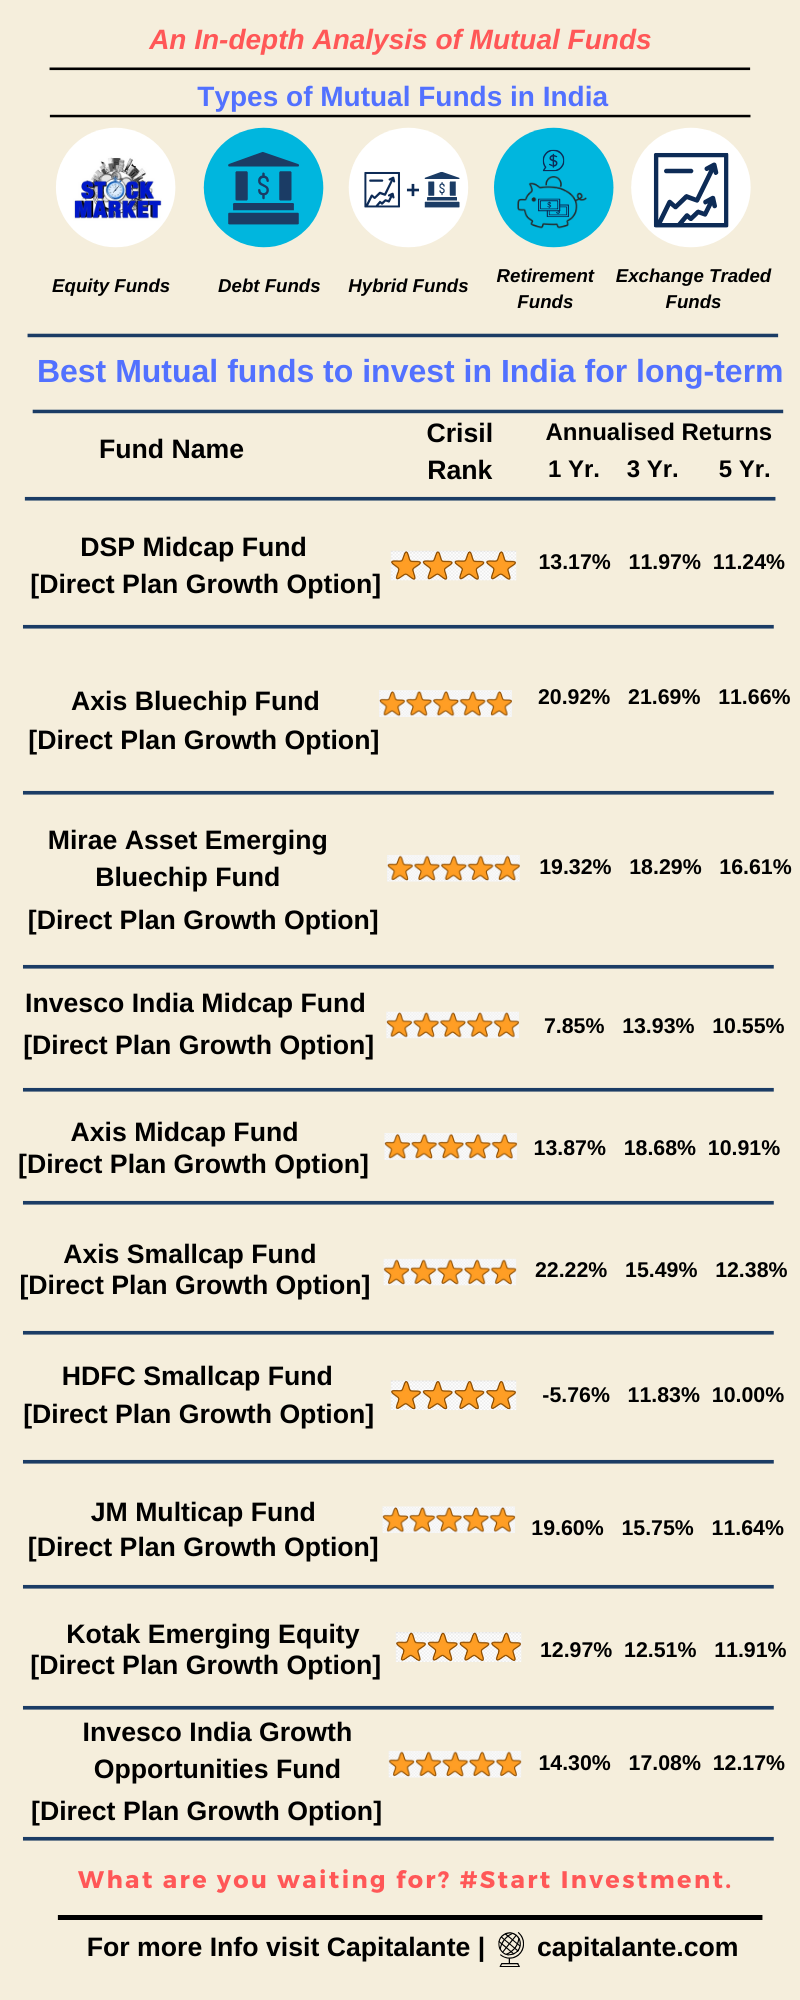 Top 10 Best Mutual funds to invest India for - Capitalante